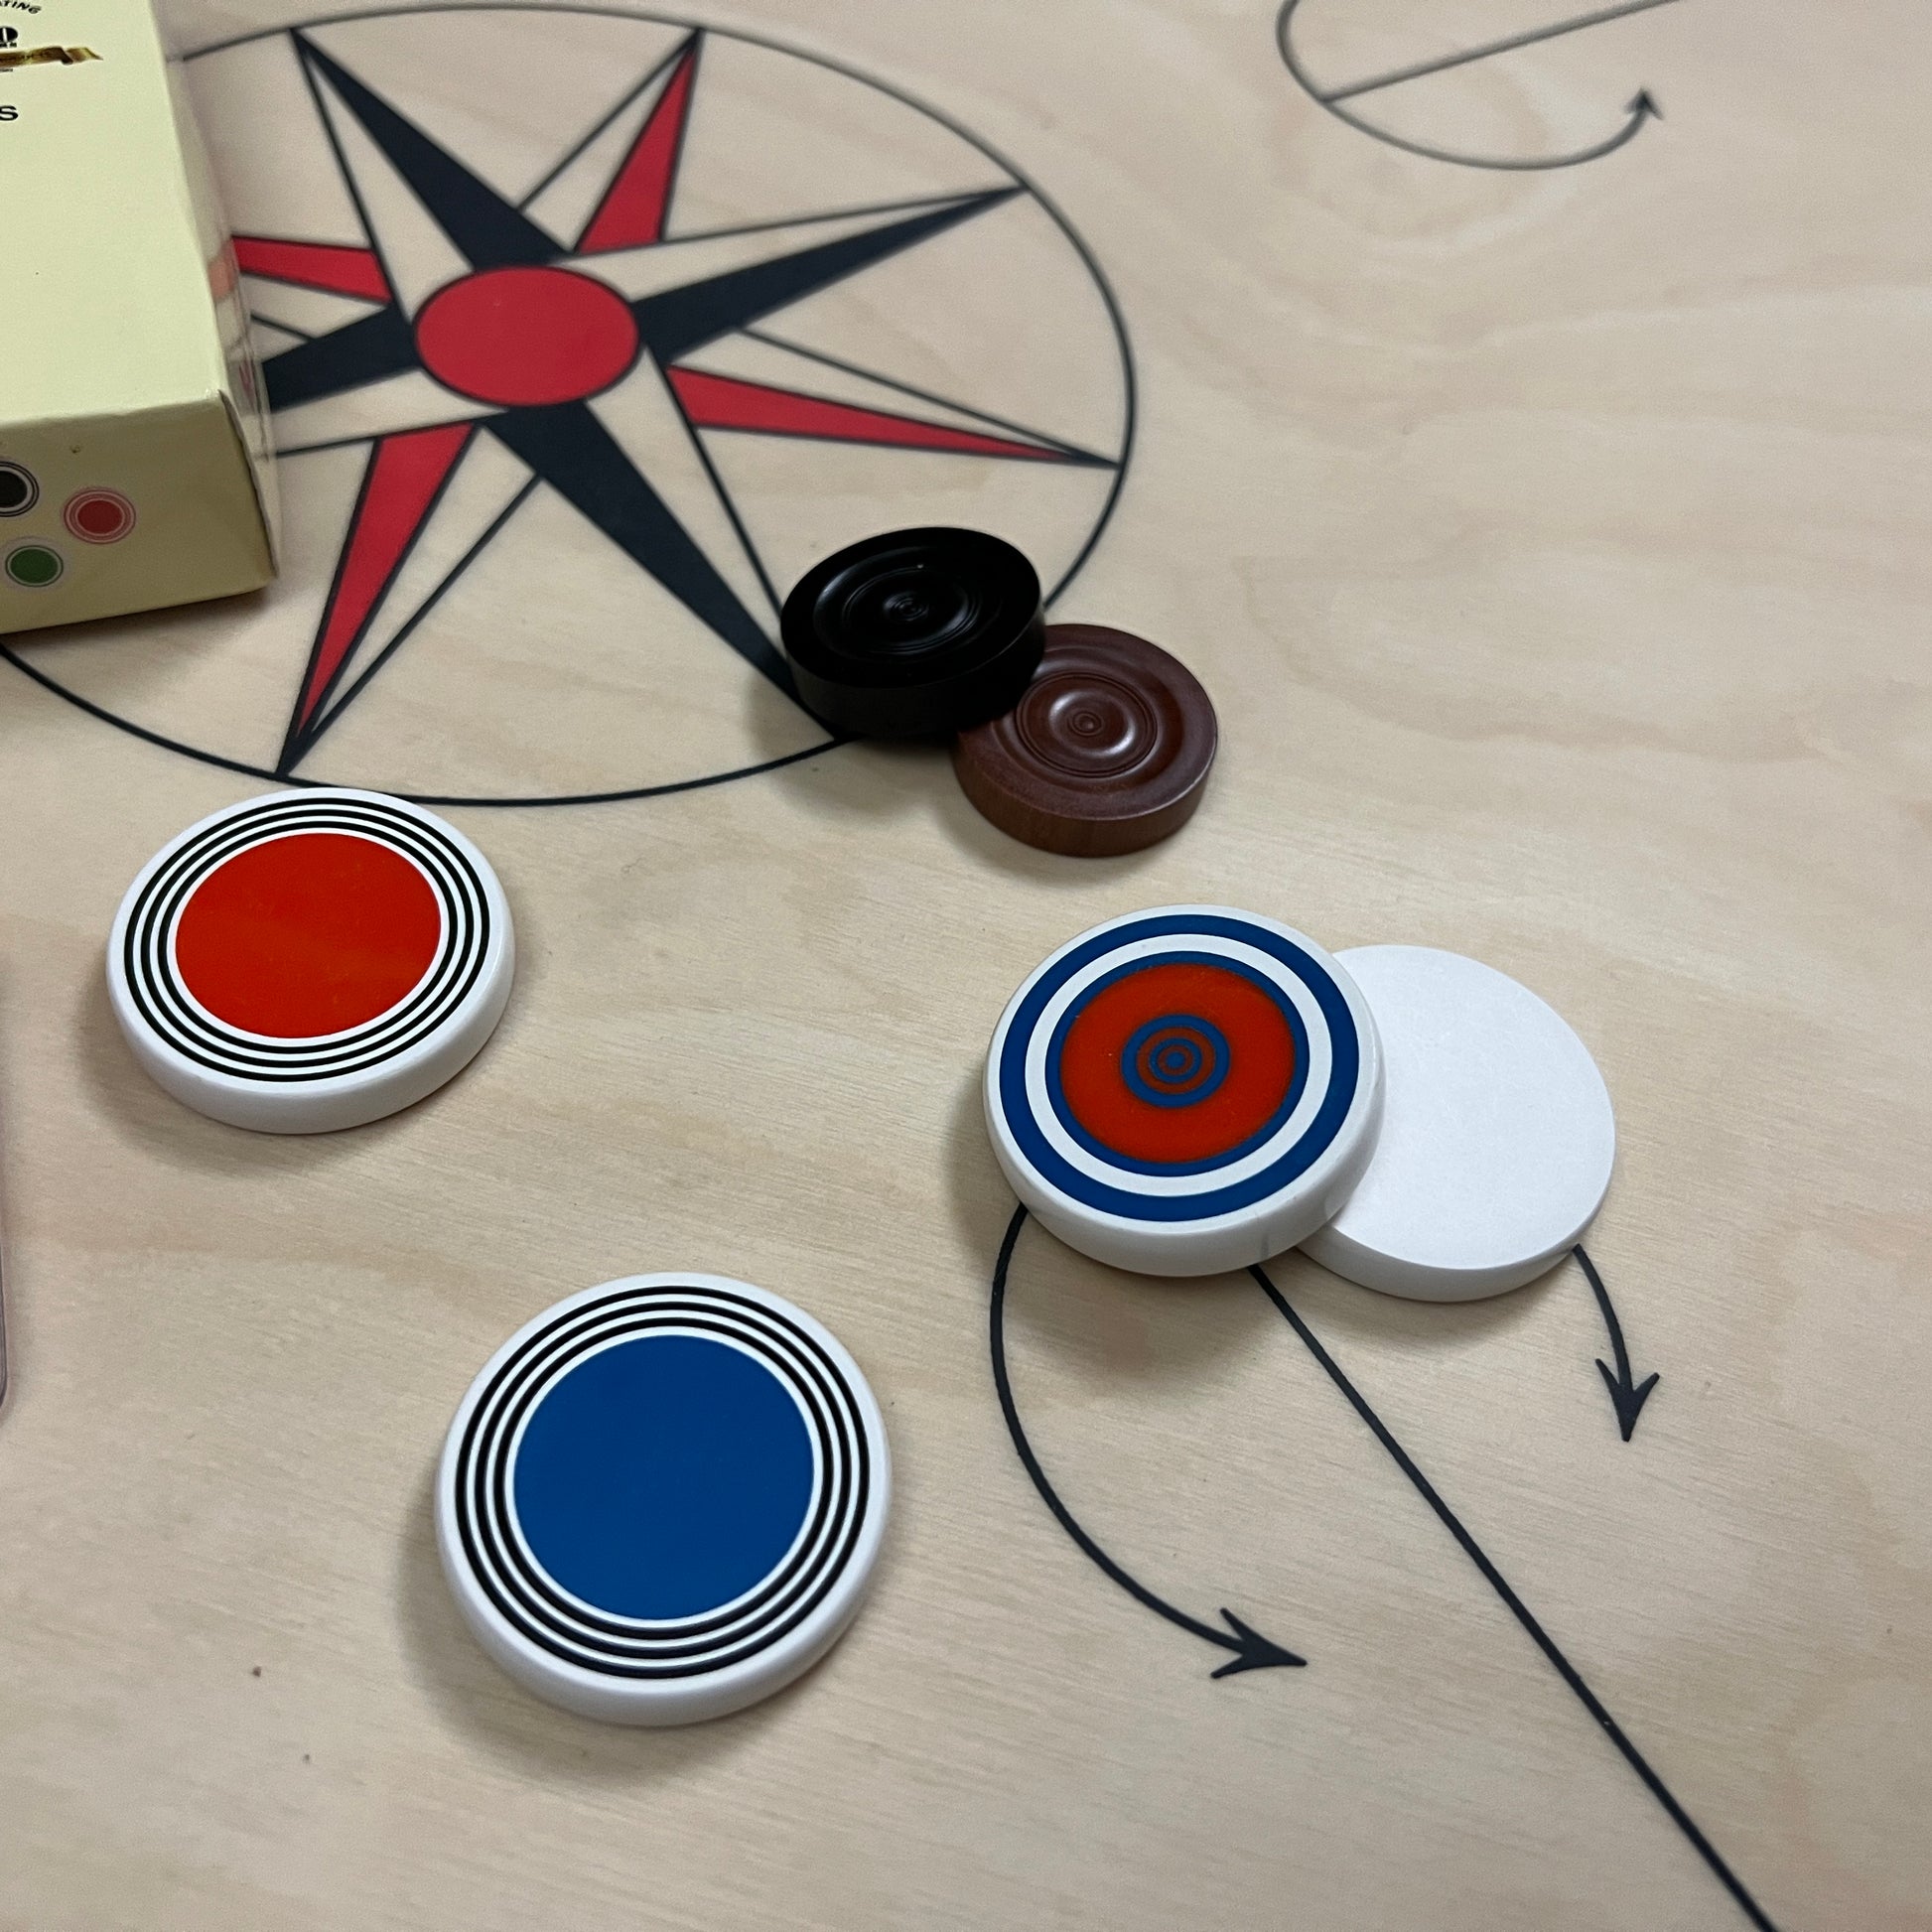 Regular class Precise Chroma carrom striker, packed in a professional box, each with a unique elegant design, available only at Black Ash Sports.